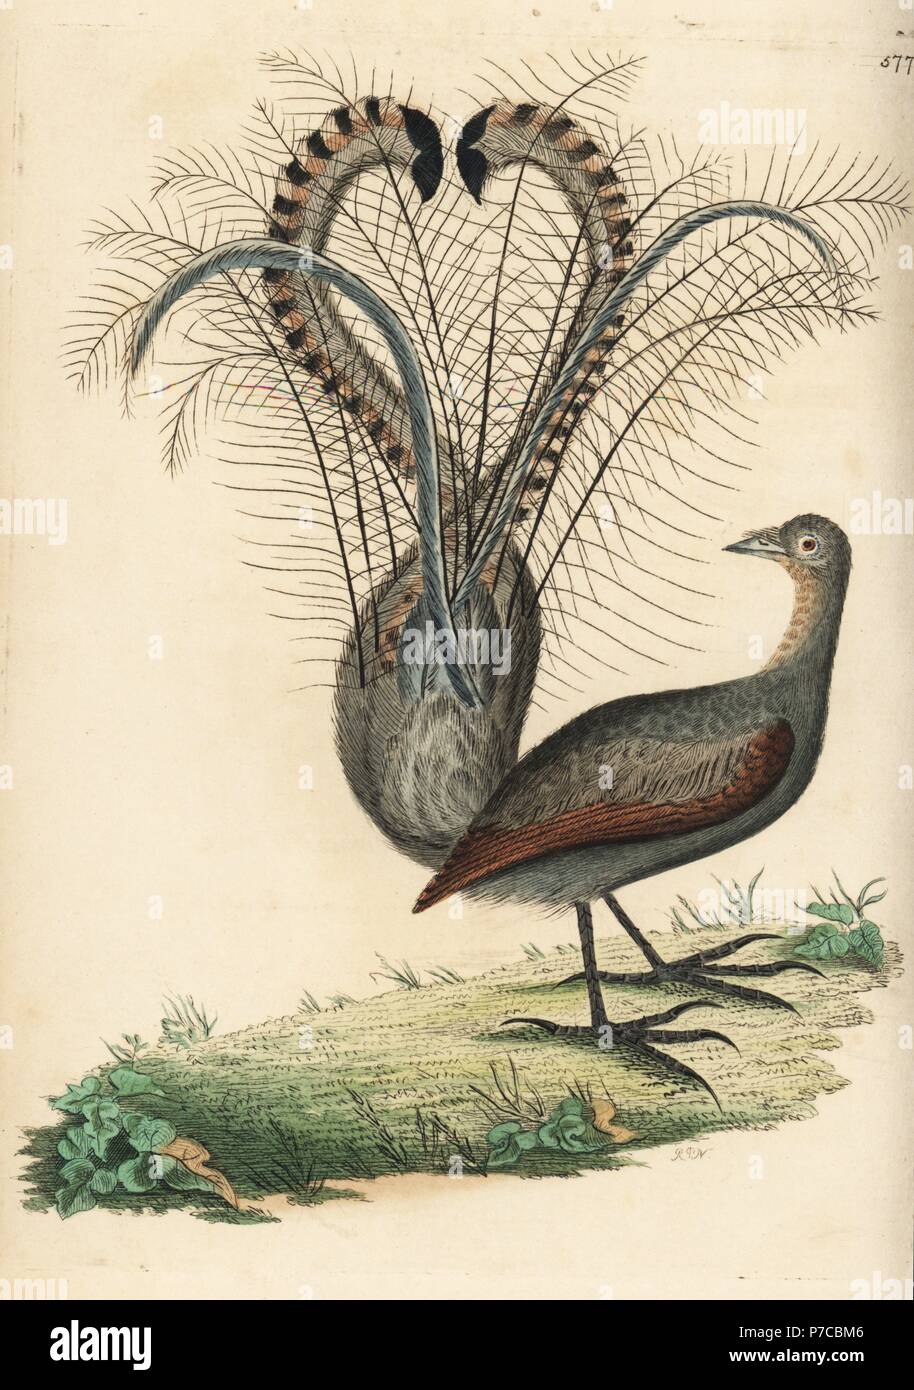 Superb lyrebird, Menura novaehollandiae (Parkinsonian paradise bird, Paradisea parkinsoniana). Illustration drawn and engraved by Richard Polydore Nodder. Handcoloured copperplate engraving from George Shaw and Frederick Nodder's The Naturalist's Miscellany, London, 1802. Stock Photo